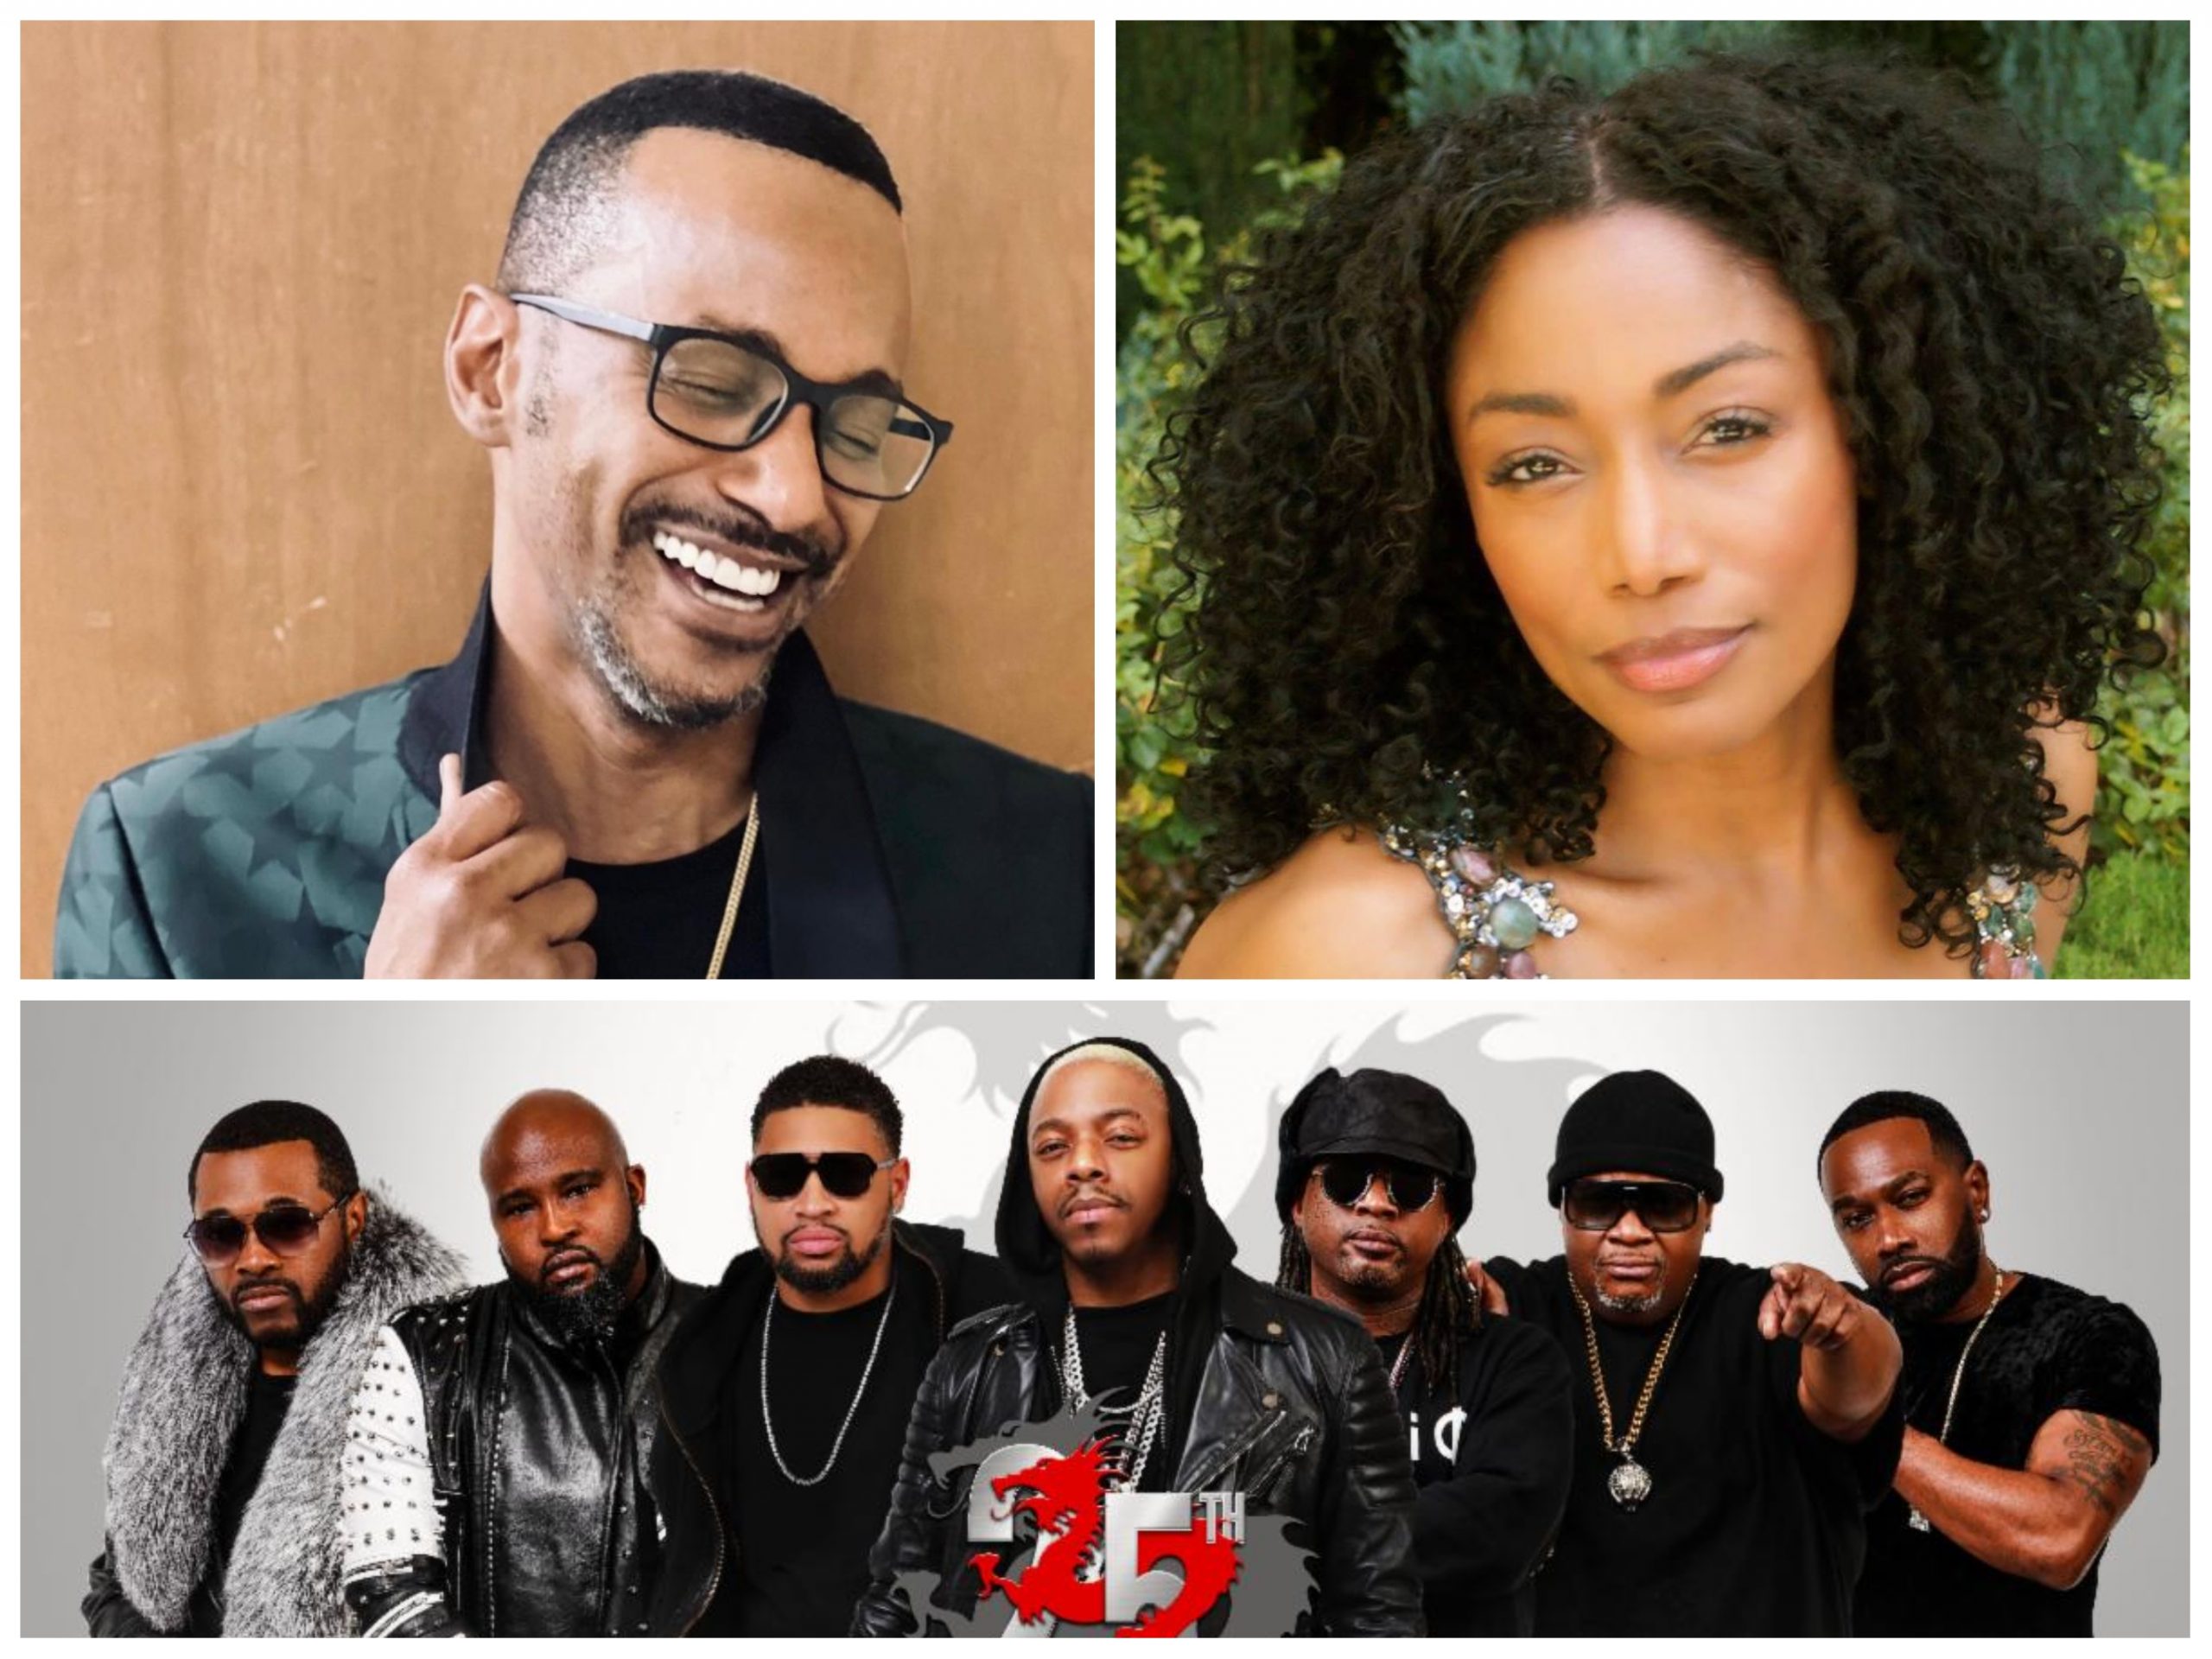 Tevin Campbell, Karyn White, Dru Hill And More To Be Recognized At Black Music Honors 2022